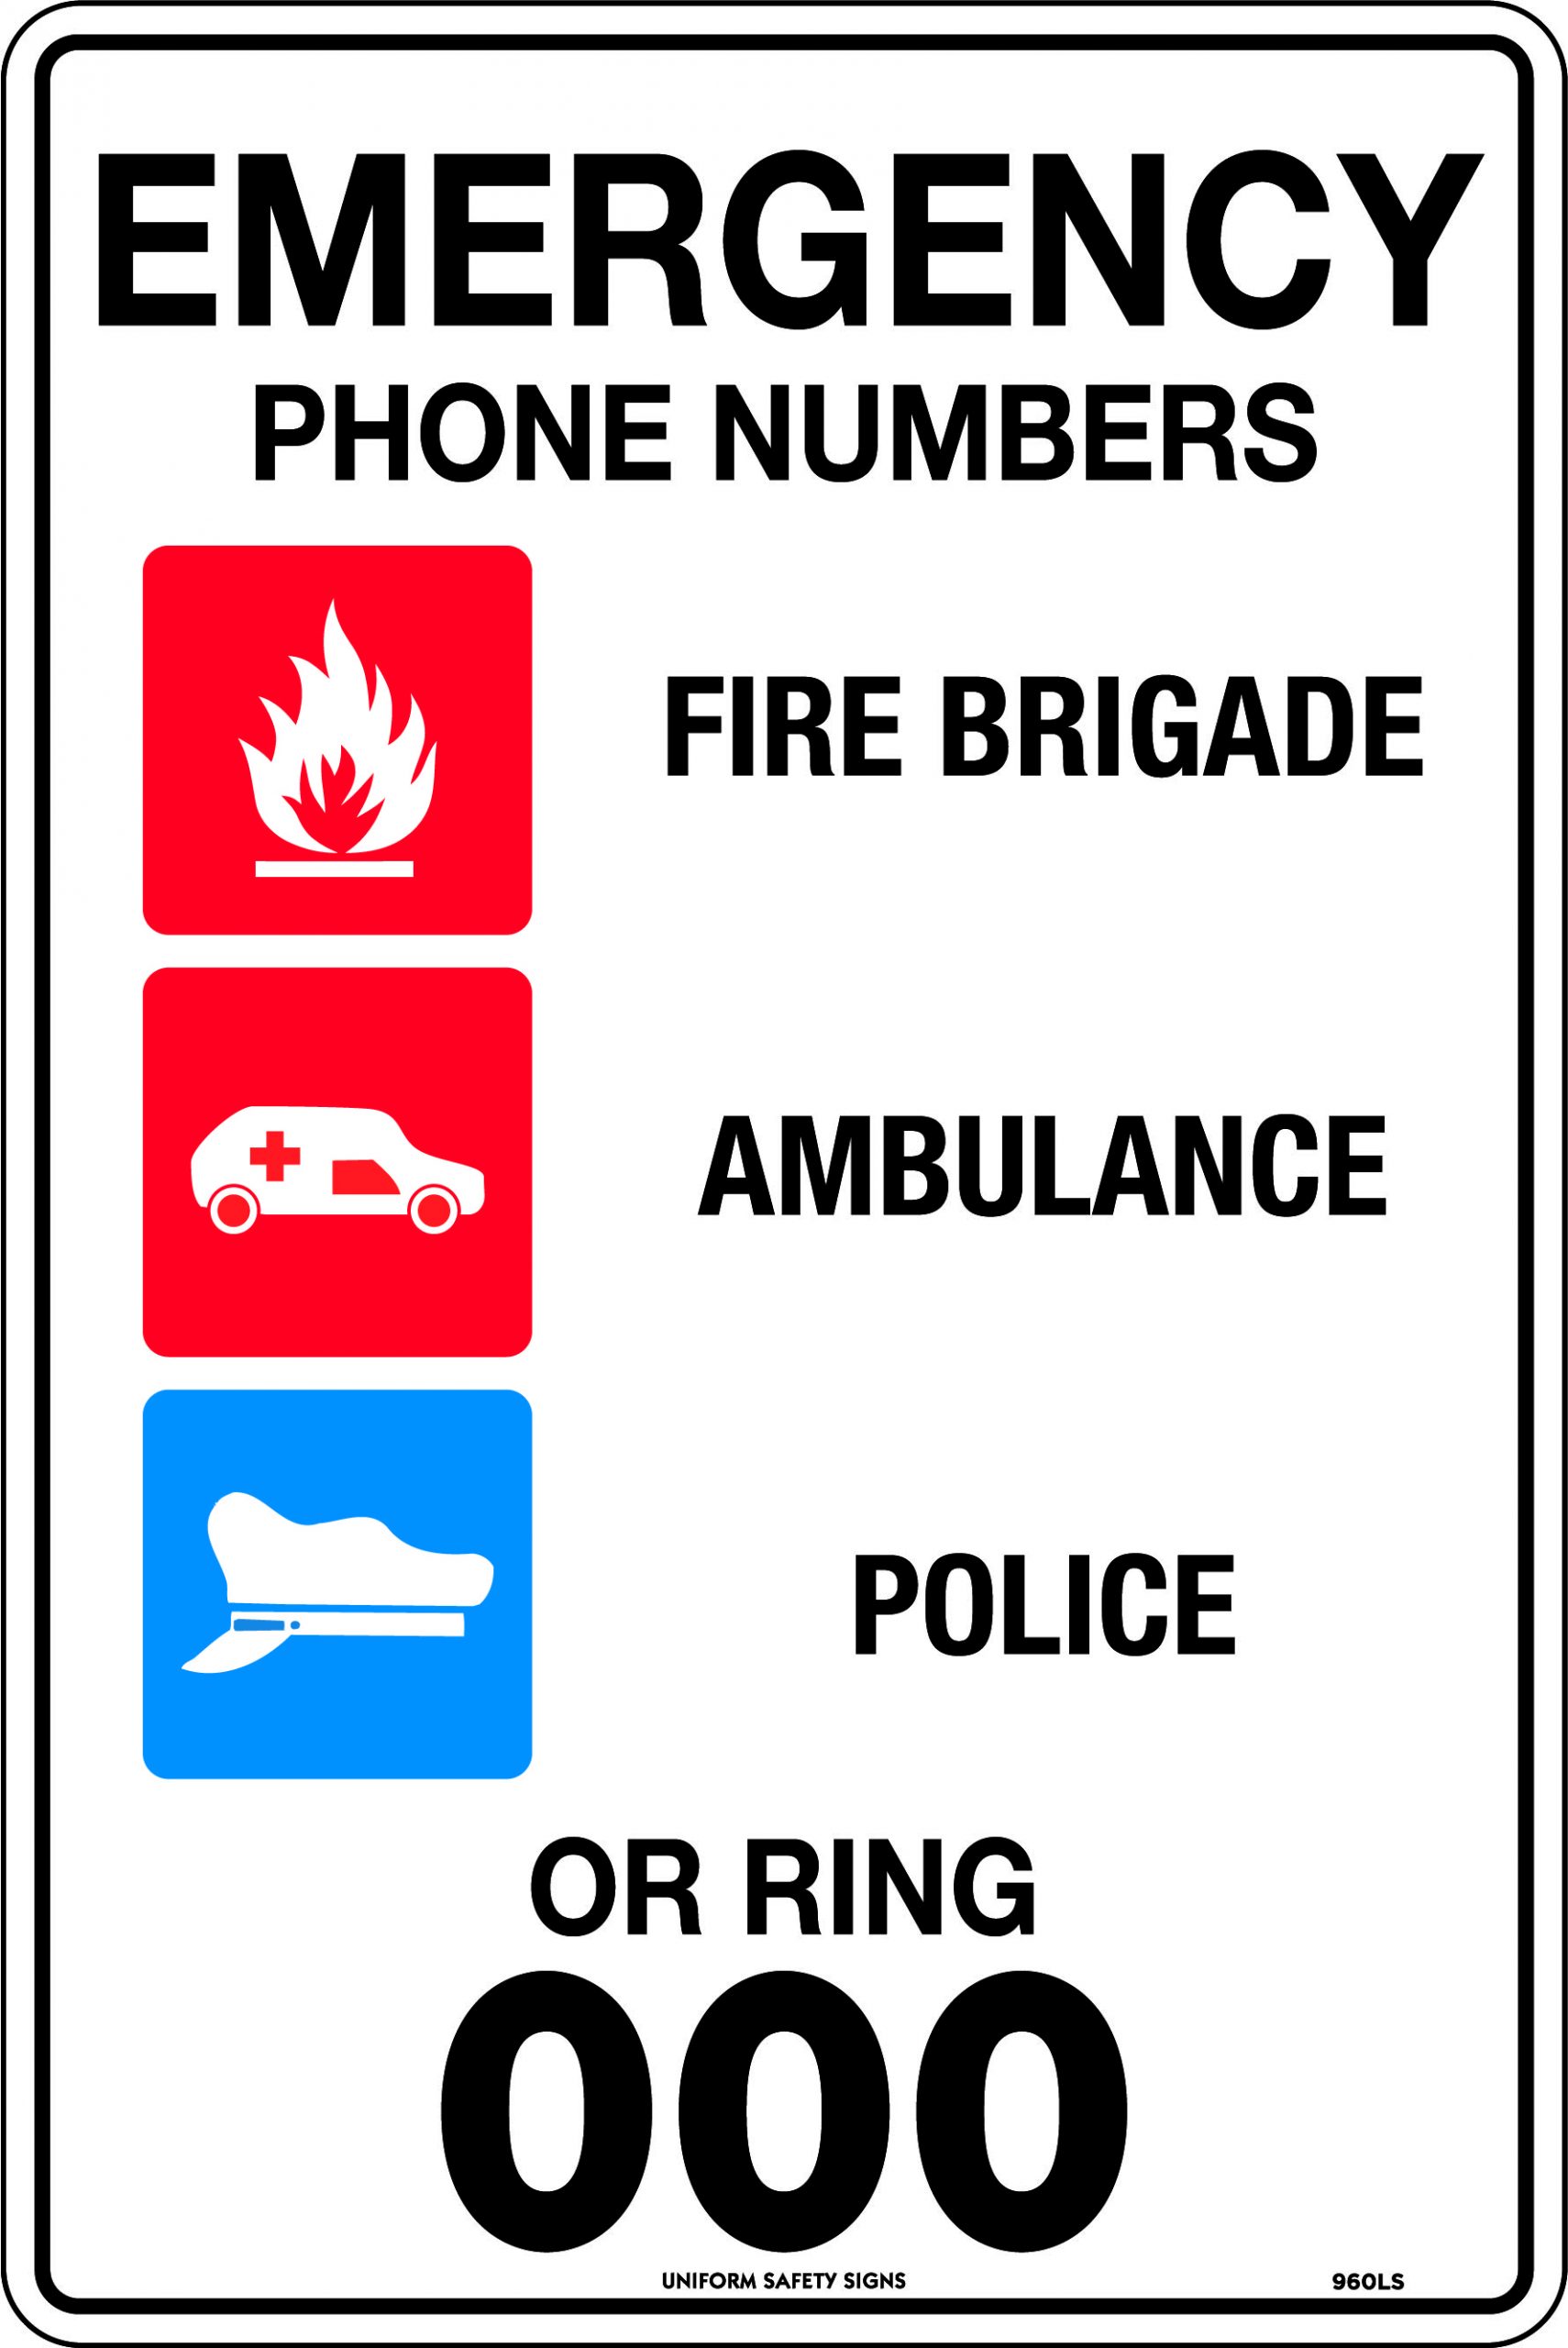 UNIFORM SAFETY 450X300MM METAL EMERGENCY PHONE NUMBERS OR RING 000